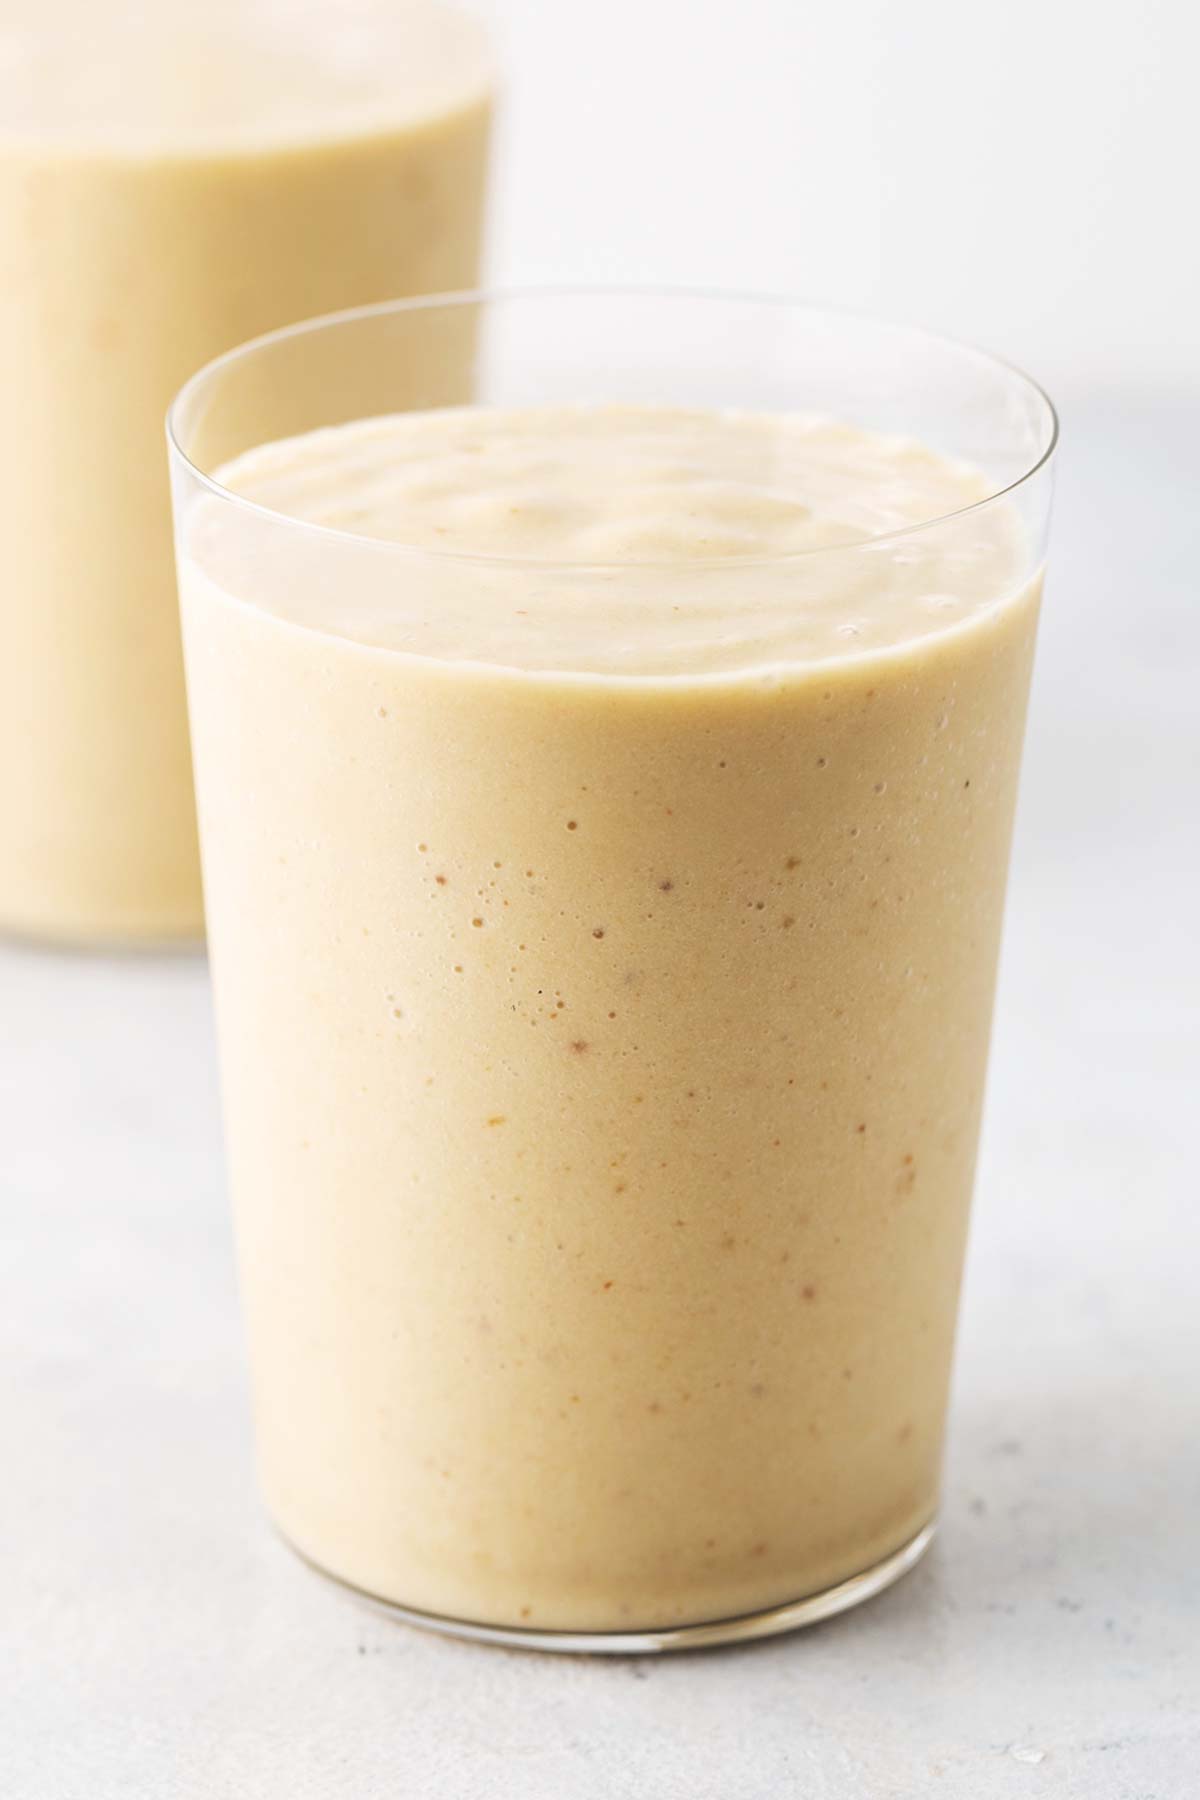 Coconut milk smoothie in a glass.